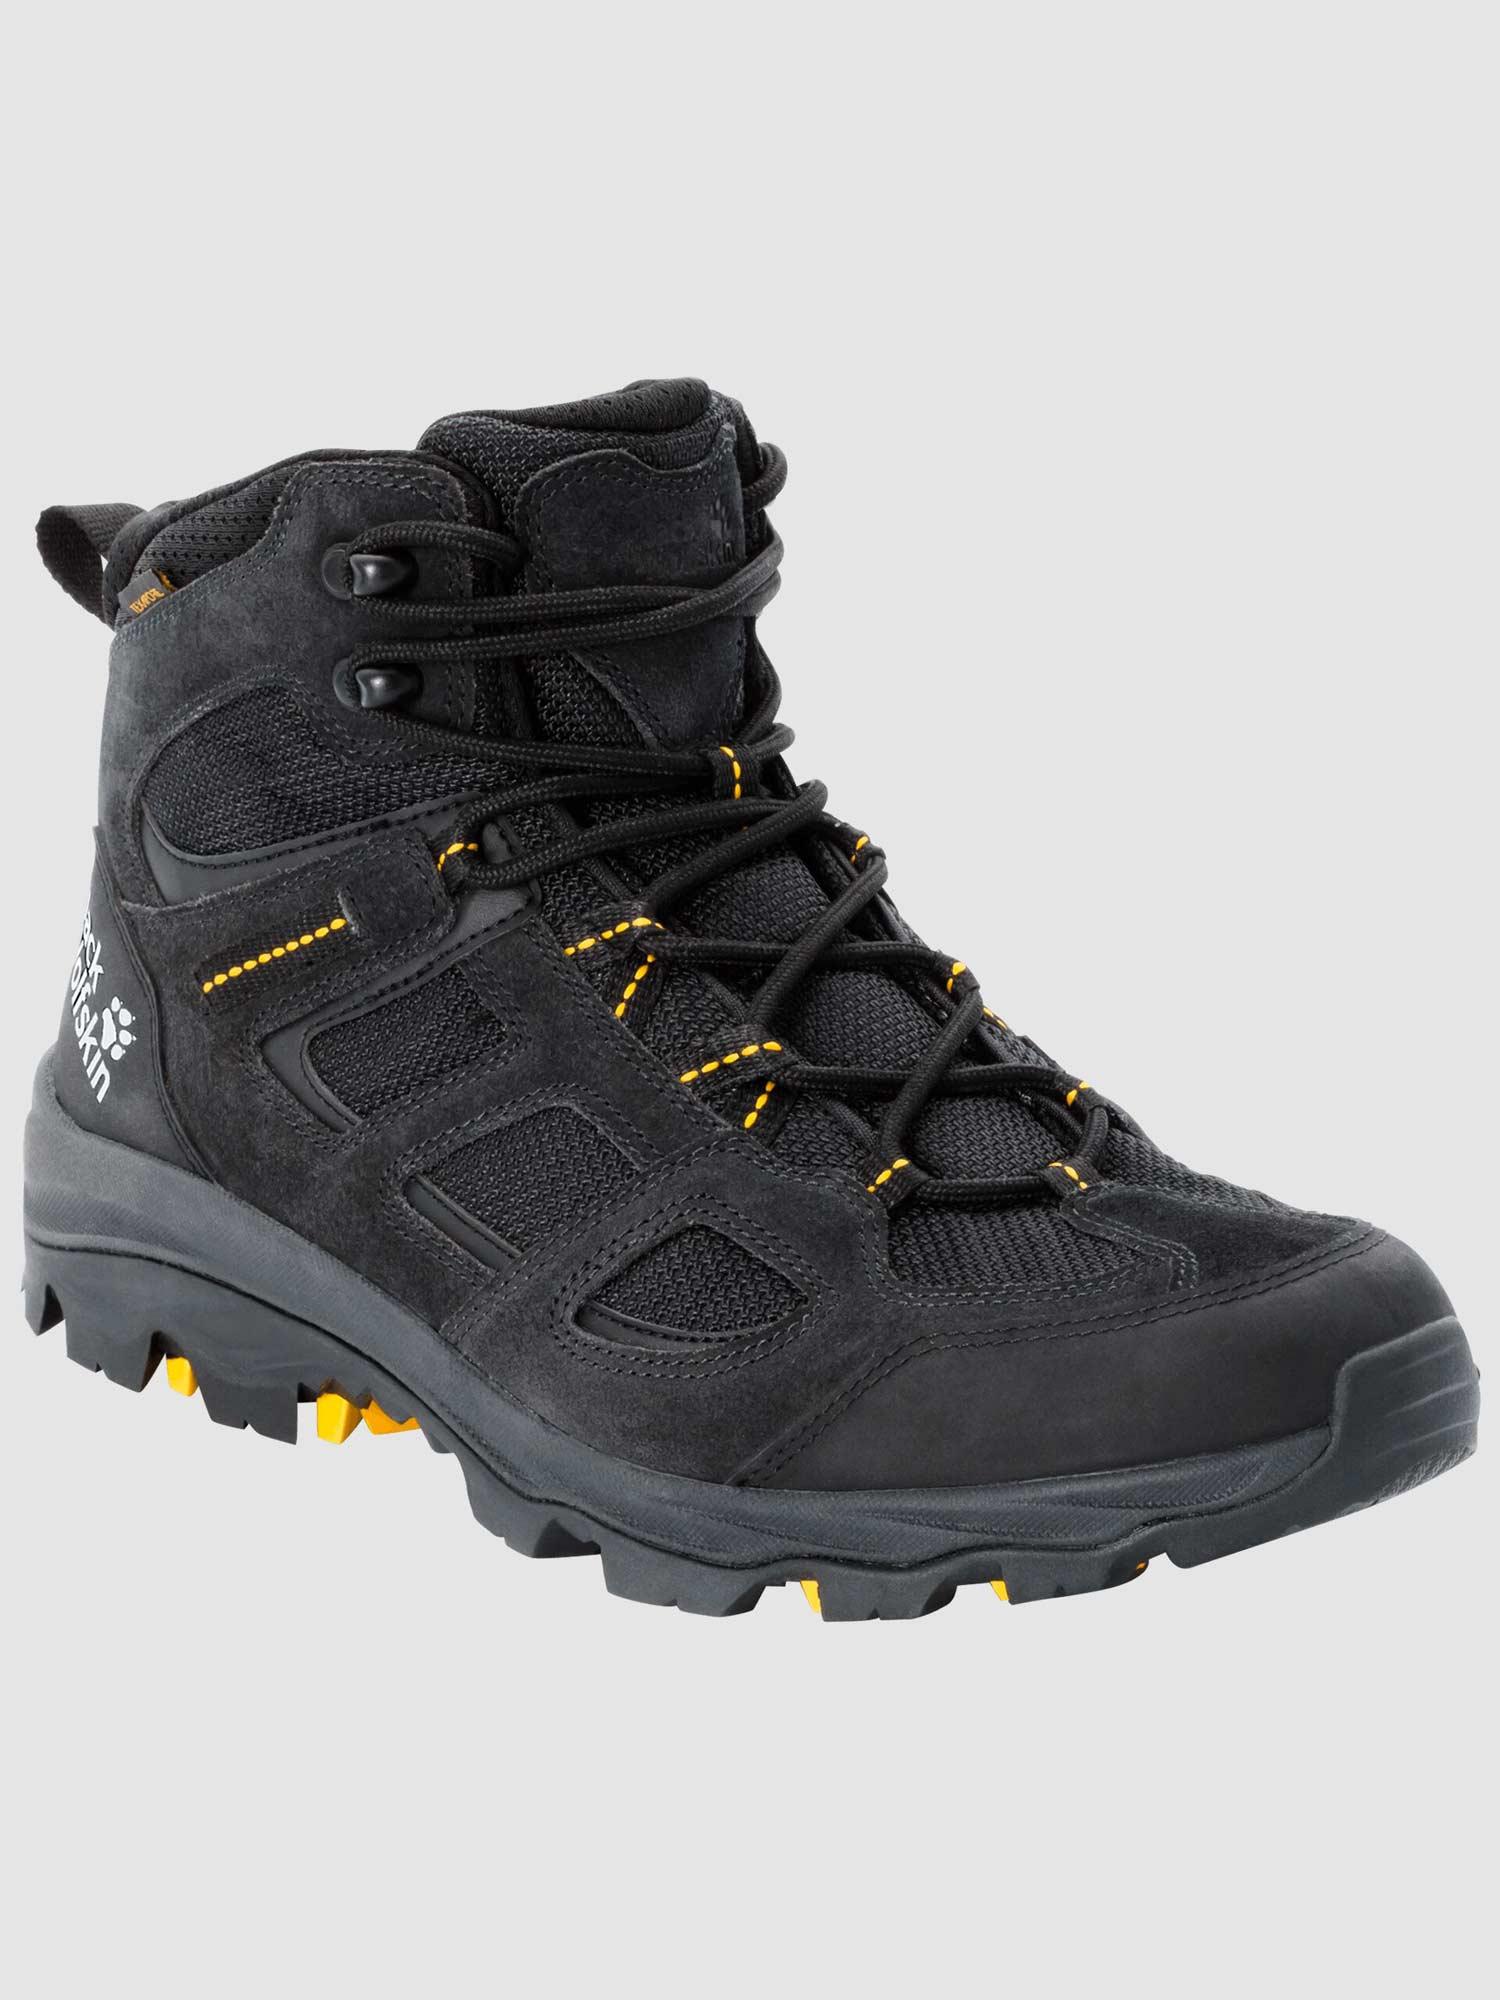 Selected image for JACK WOLFSKIN Muške cipele Vojo 3 Texapore Mid crne